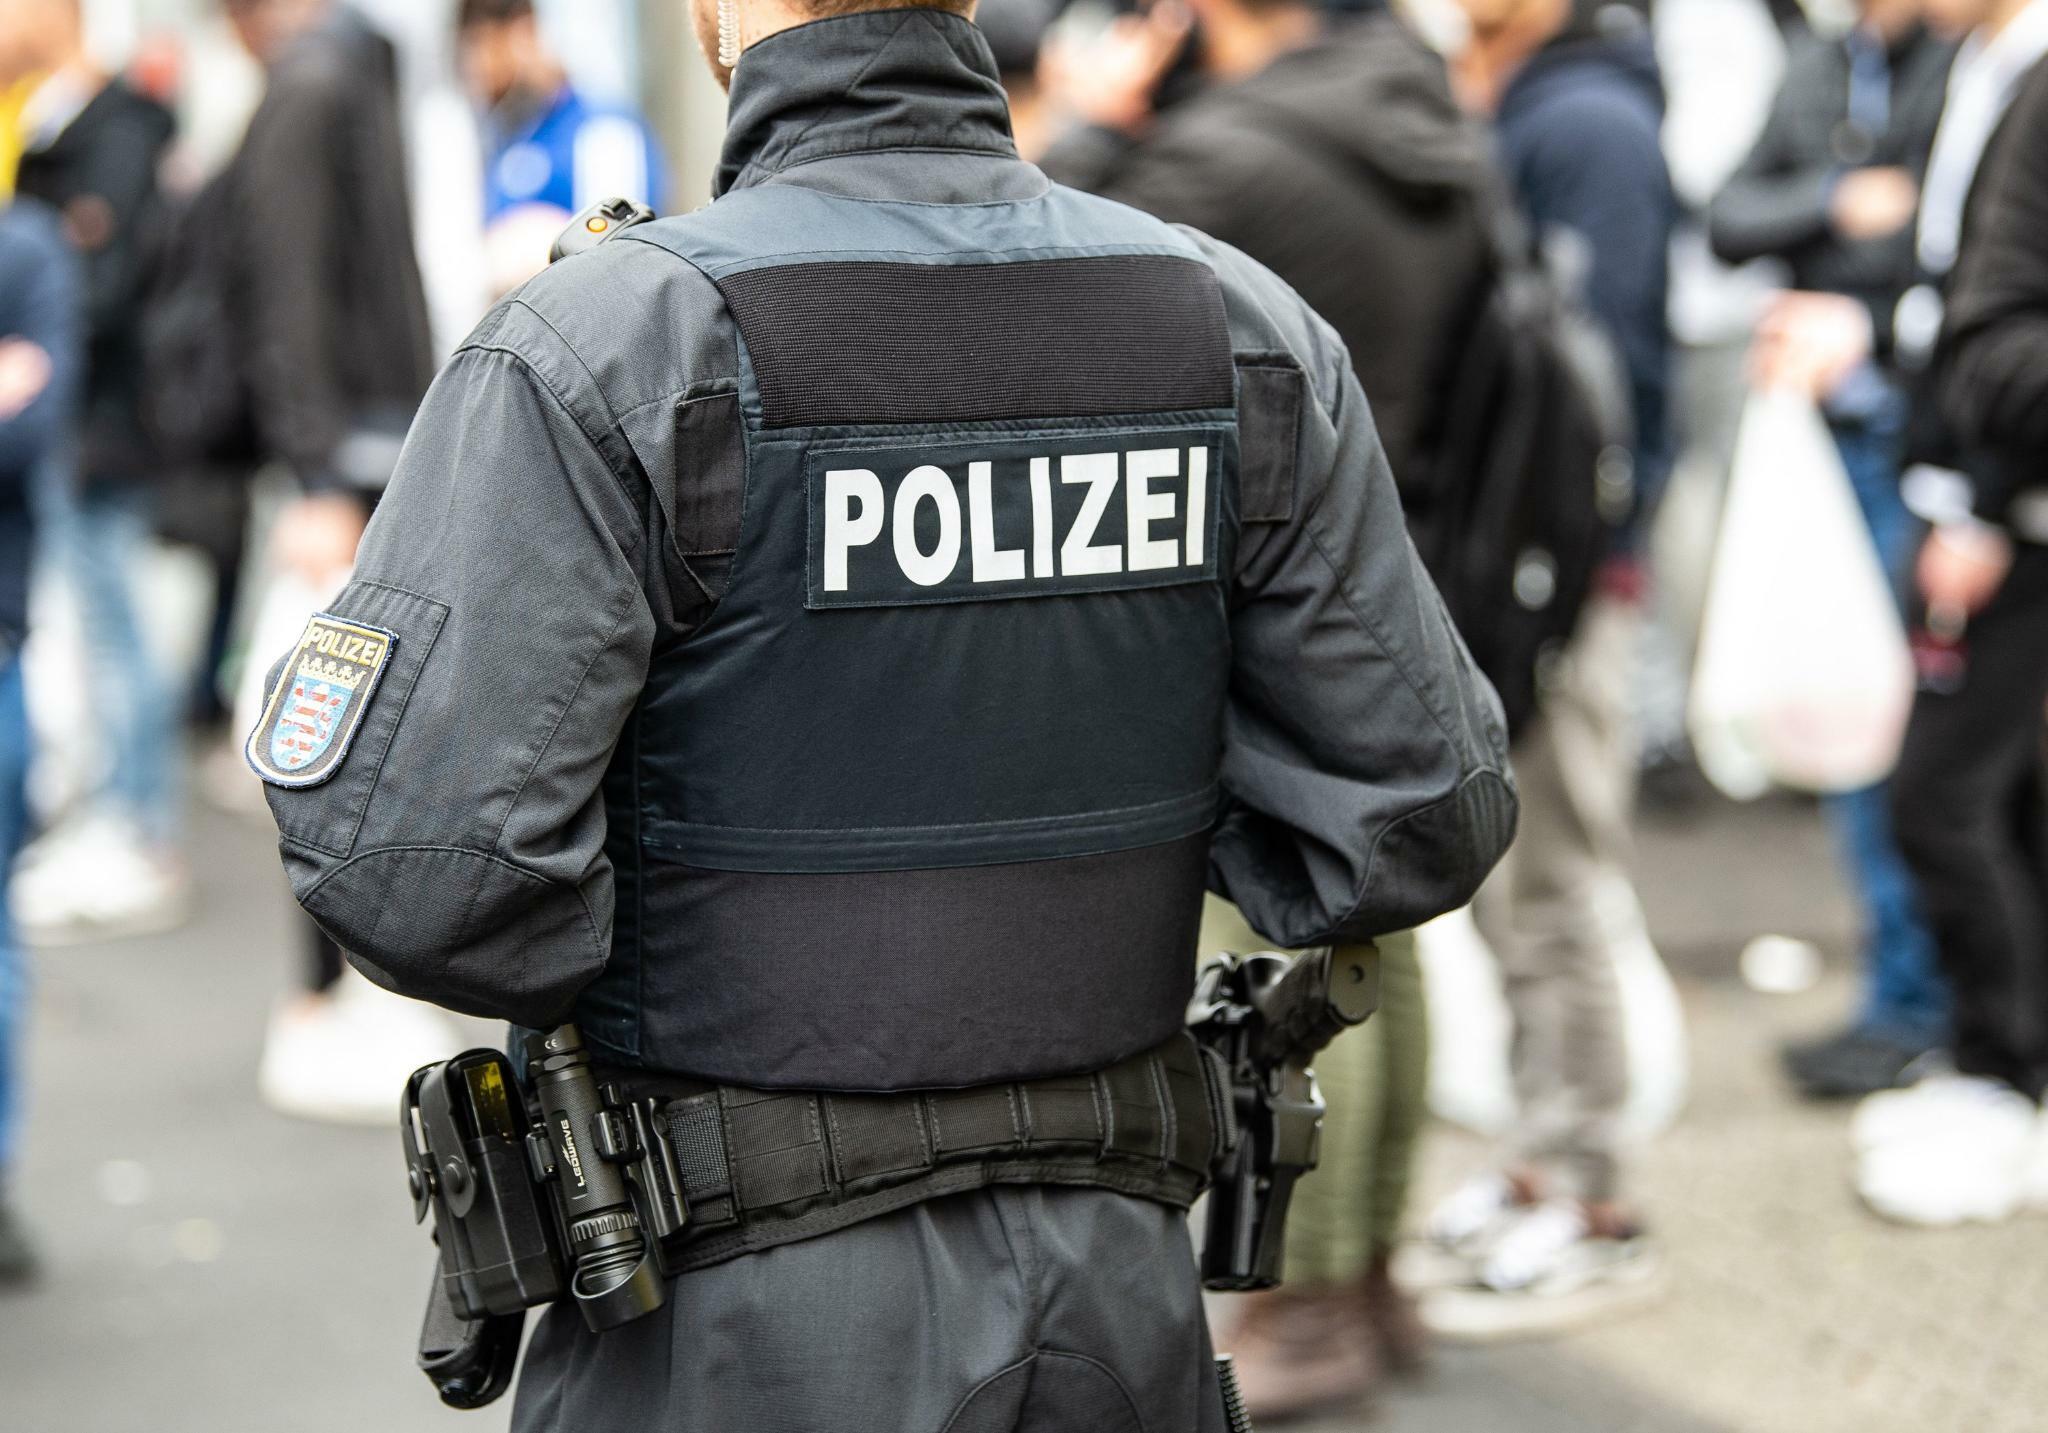 Germany ـ far-right chat groups have been discovered among members of police forces